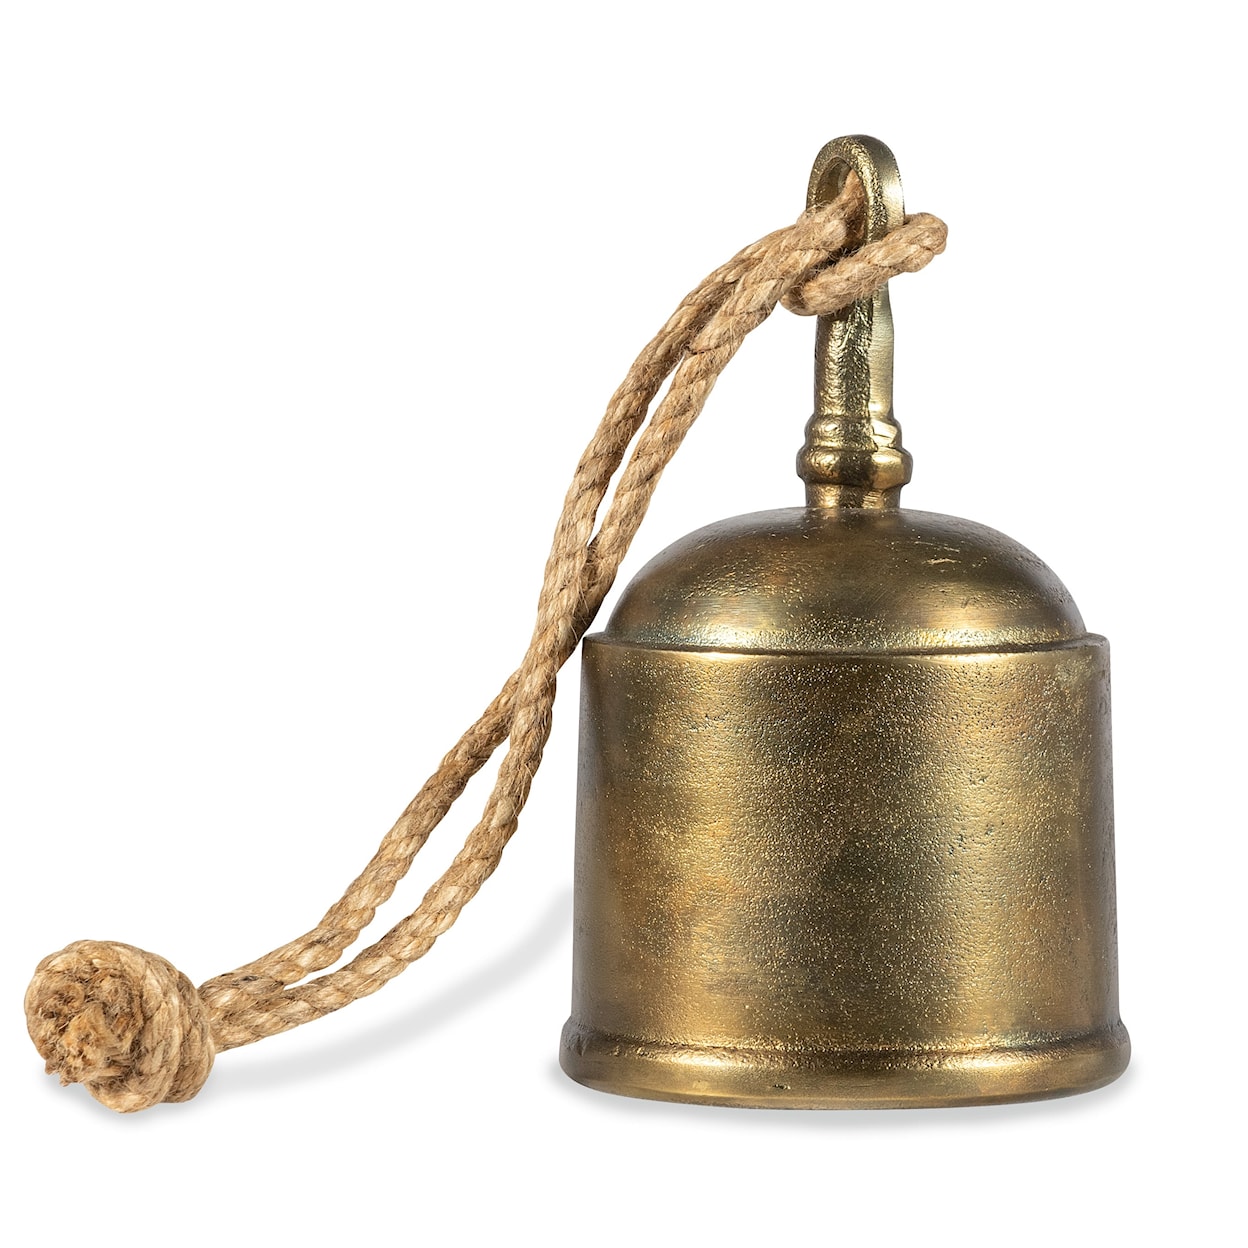 BOBO Intriguing Objects BOBO Intriguing Objects Antique Brass Bell - Large